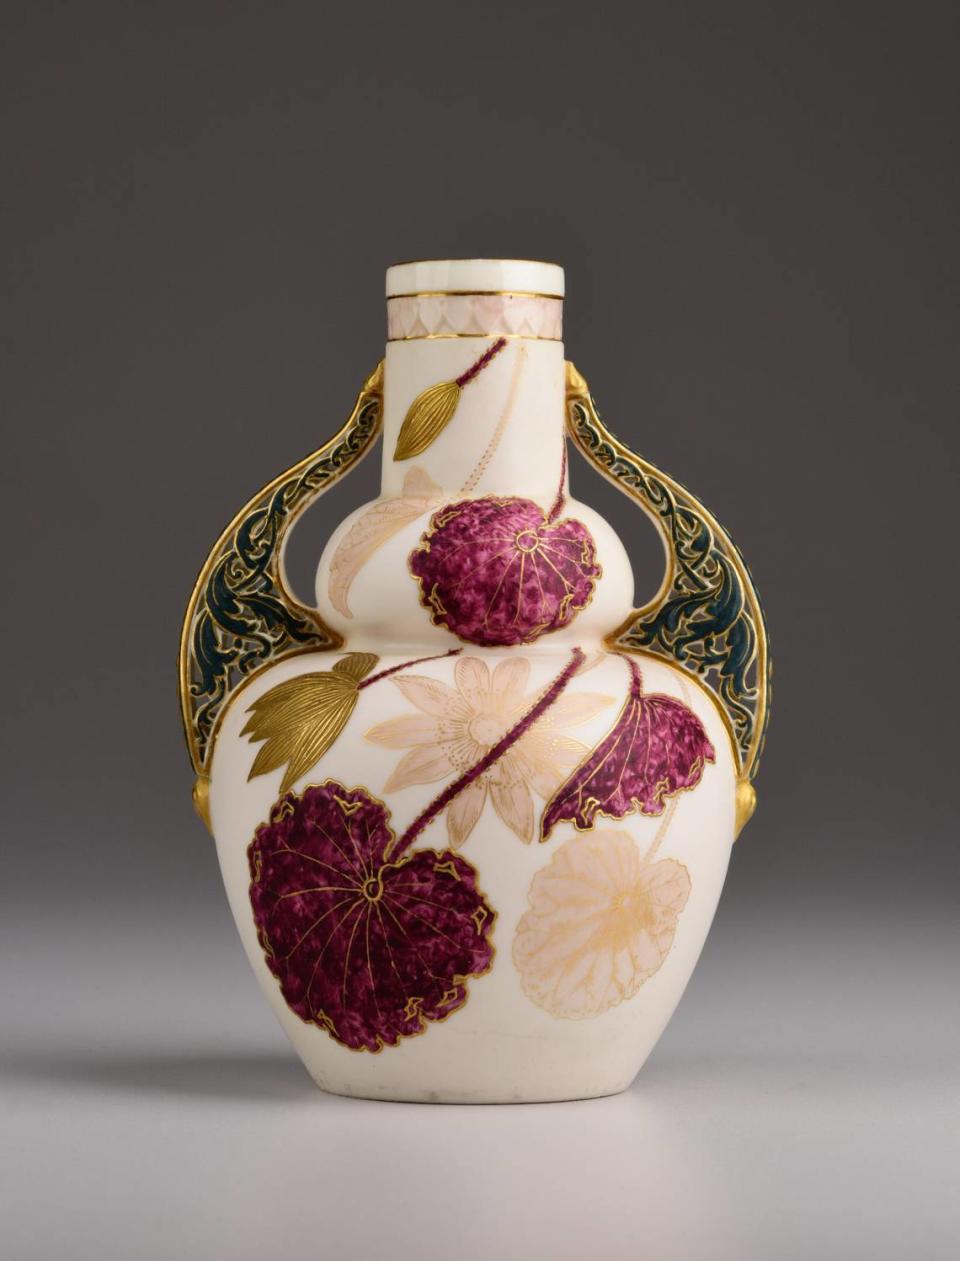 Willets Manufacturing Company (Trenton, N.J., 1879-1909), James Callowhill (English, 1838-1917). Vase, circa 1887-89, Belleek porcelain, ivory glaze, polychrome enamels, flat and raised gold decoration. The Lenox/Belleek exhibit runs from Sept. 23 to Jan. 21, 2024 at Mint Museum Randolph.